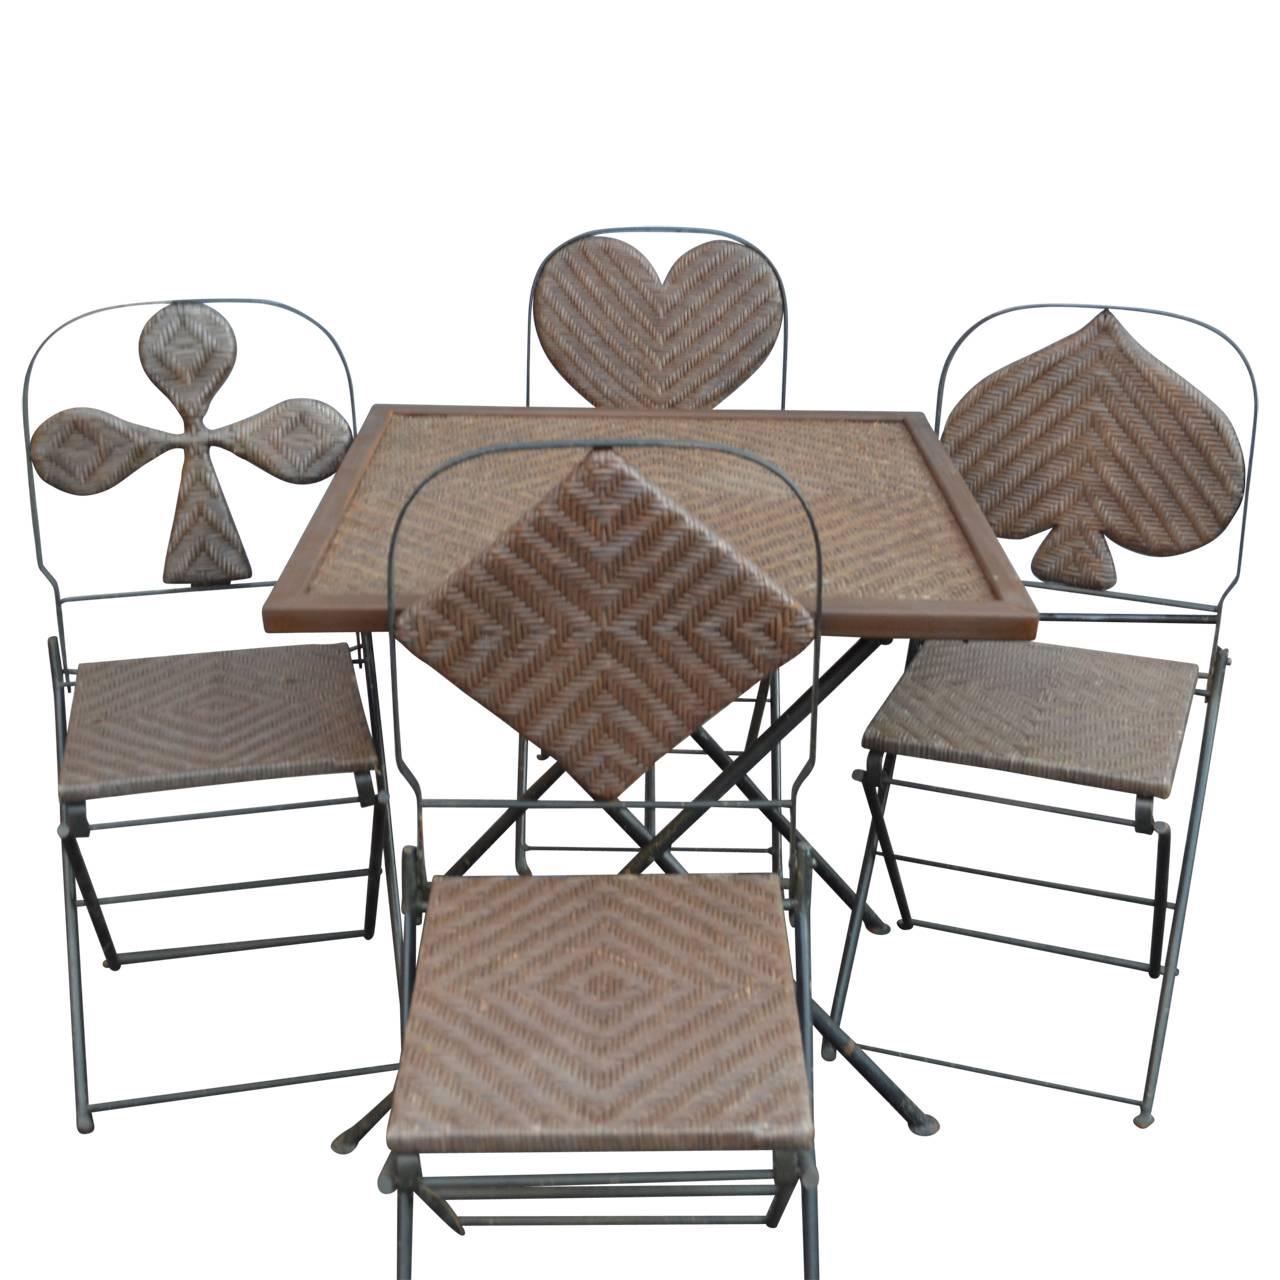 Four French suits metal wicker chairs and table; clubs, diamonds, hearts and spades.